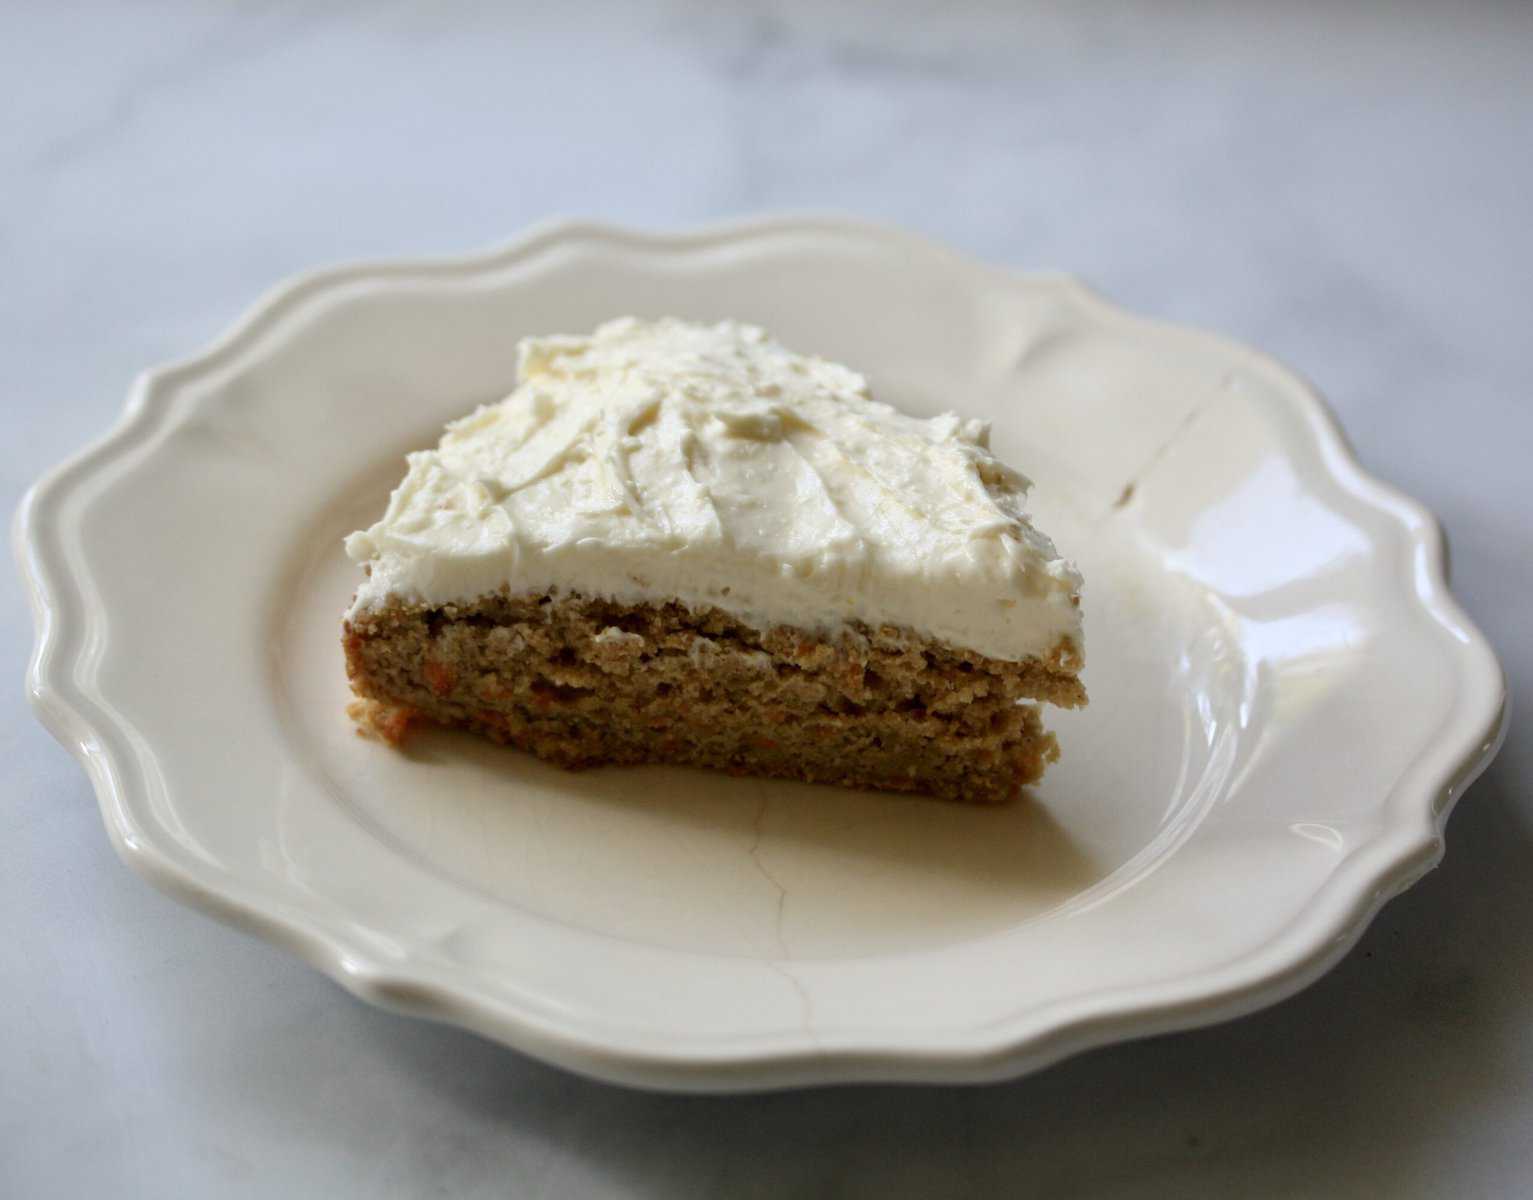 A slice of gluten-free carrot cake on a plate.